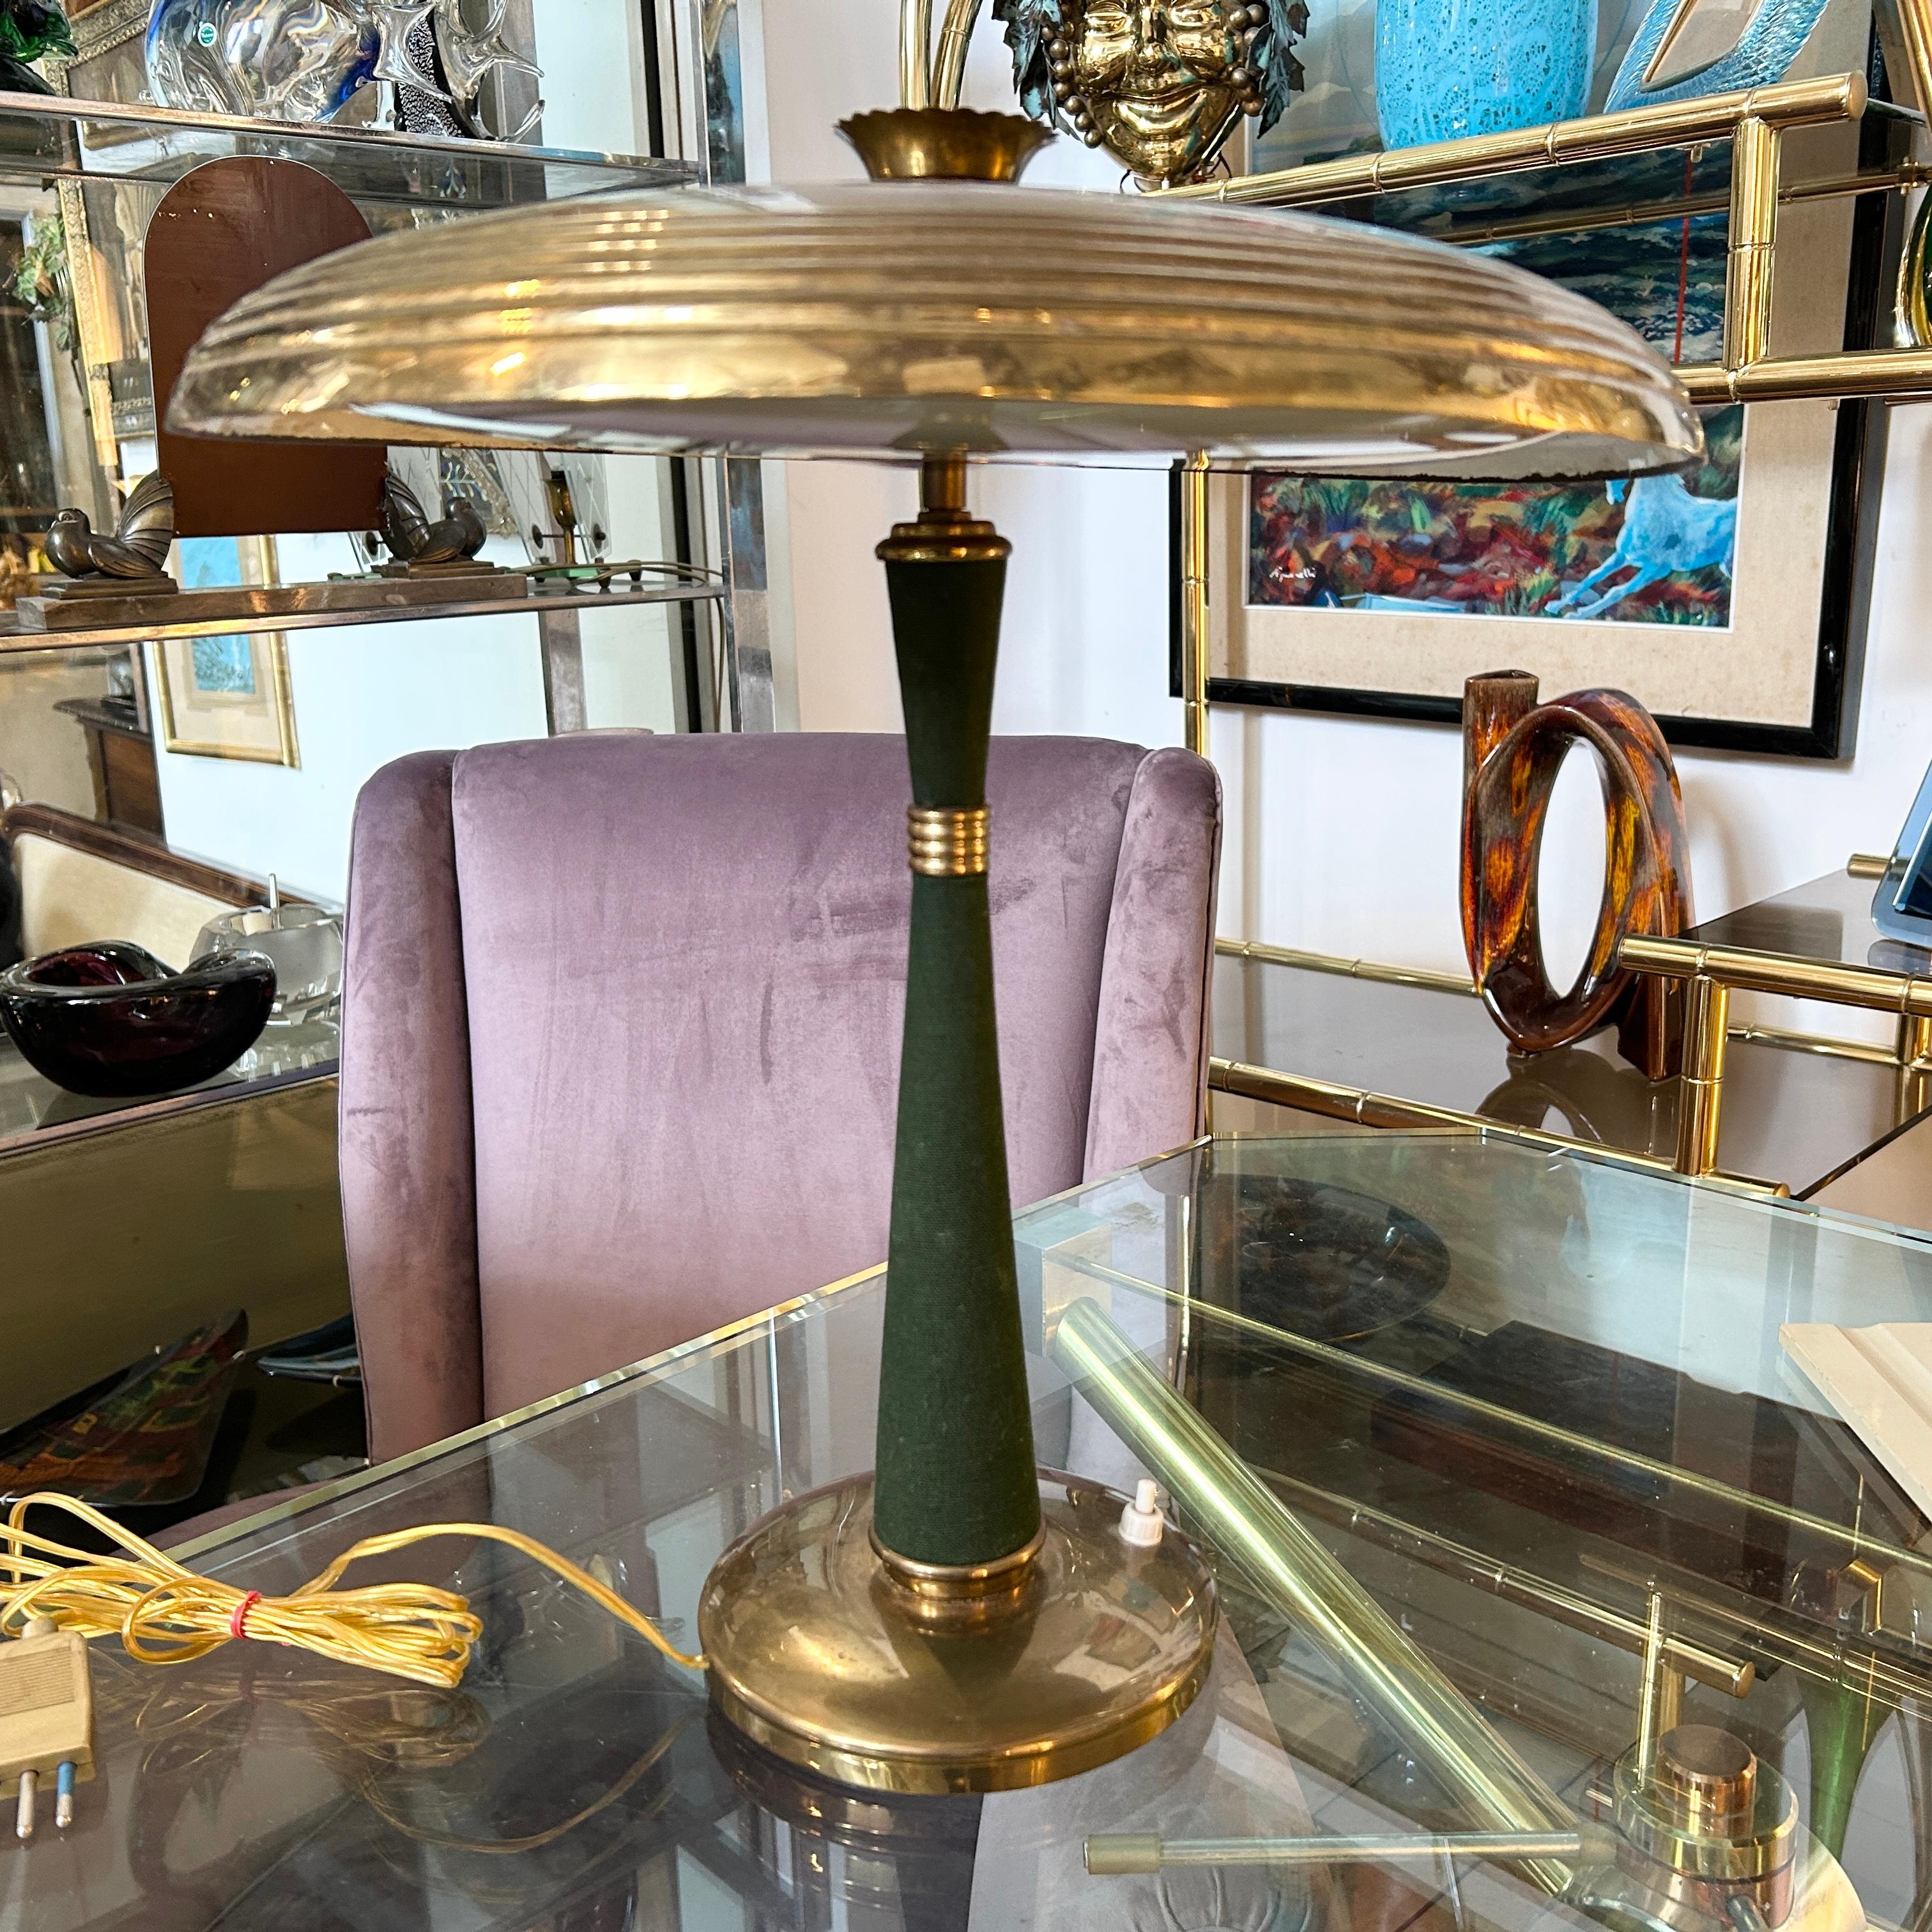 A table lamp designed and manufactured in Italy in the Fifties, it's in working order, brass in original patina, good conditions overall. This 1950s Mid-Century Modern brass and green fabric table lamp model 338 is a vintage lighting fixture that